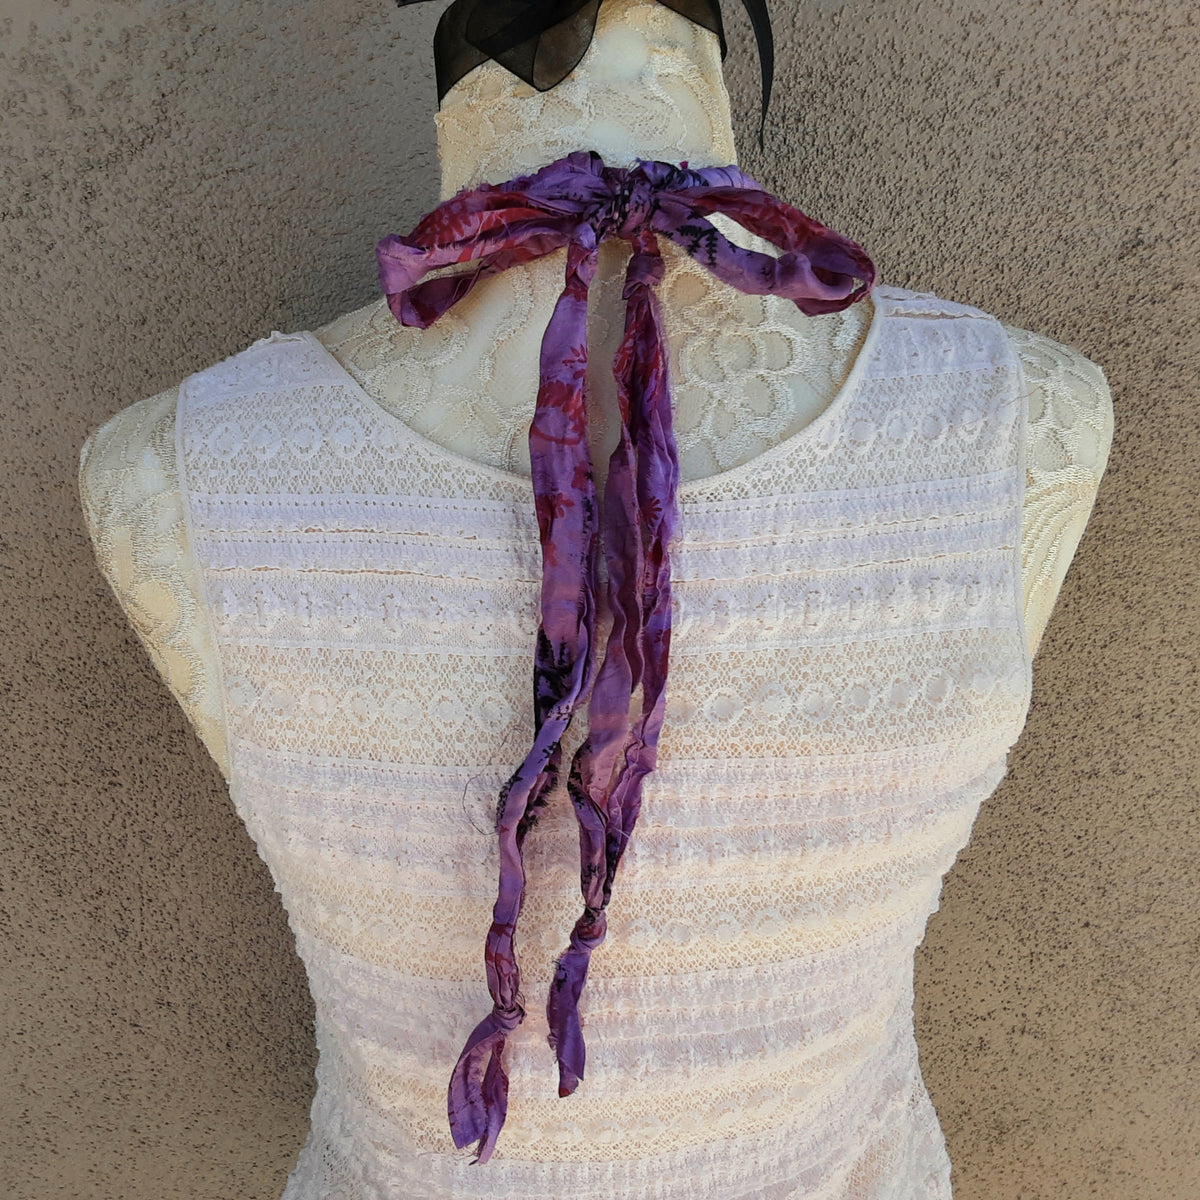 Violet Sari Silk Ribbon Flower Statement Necklace - Gypsy Style Gift for Her - Upcycled Jewelry